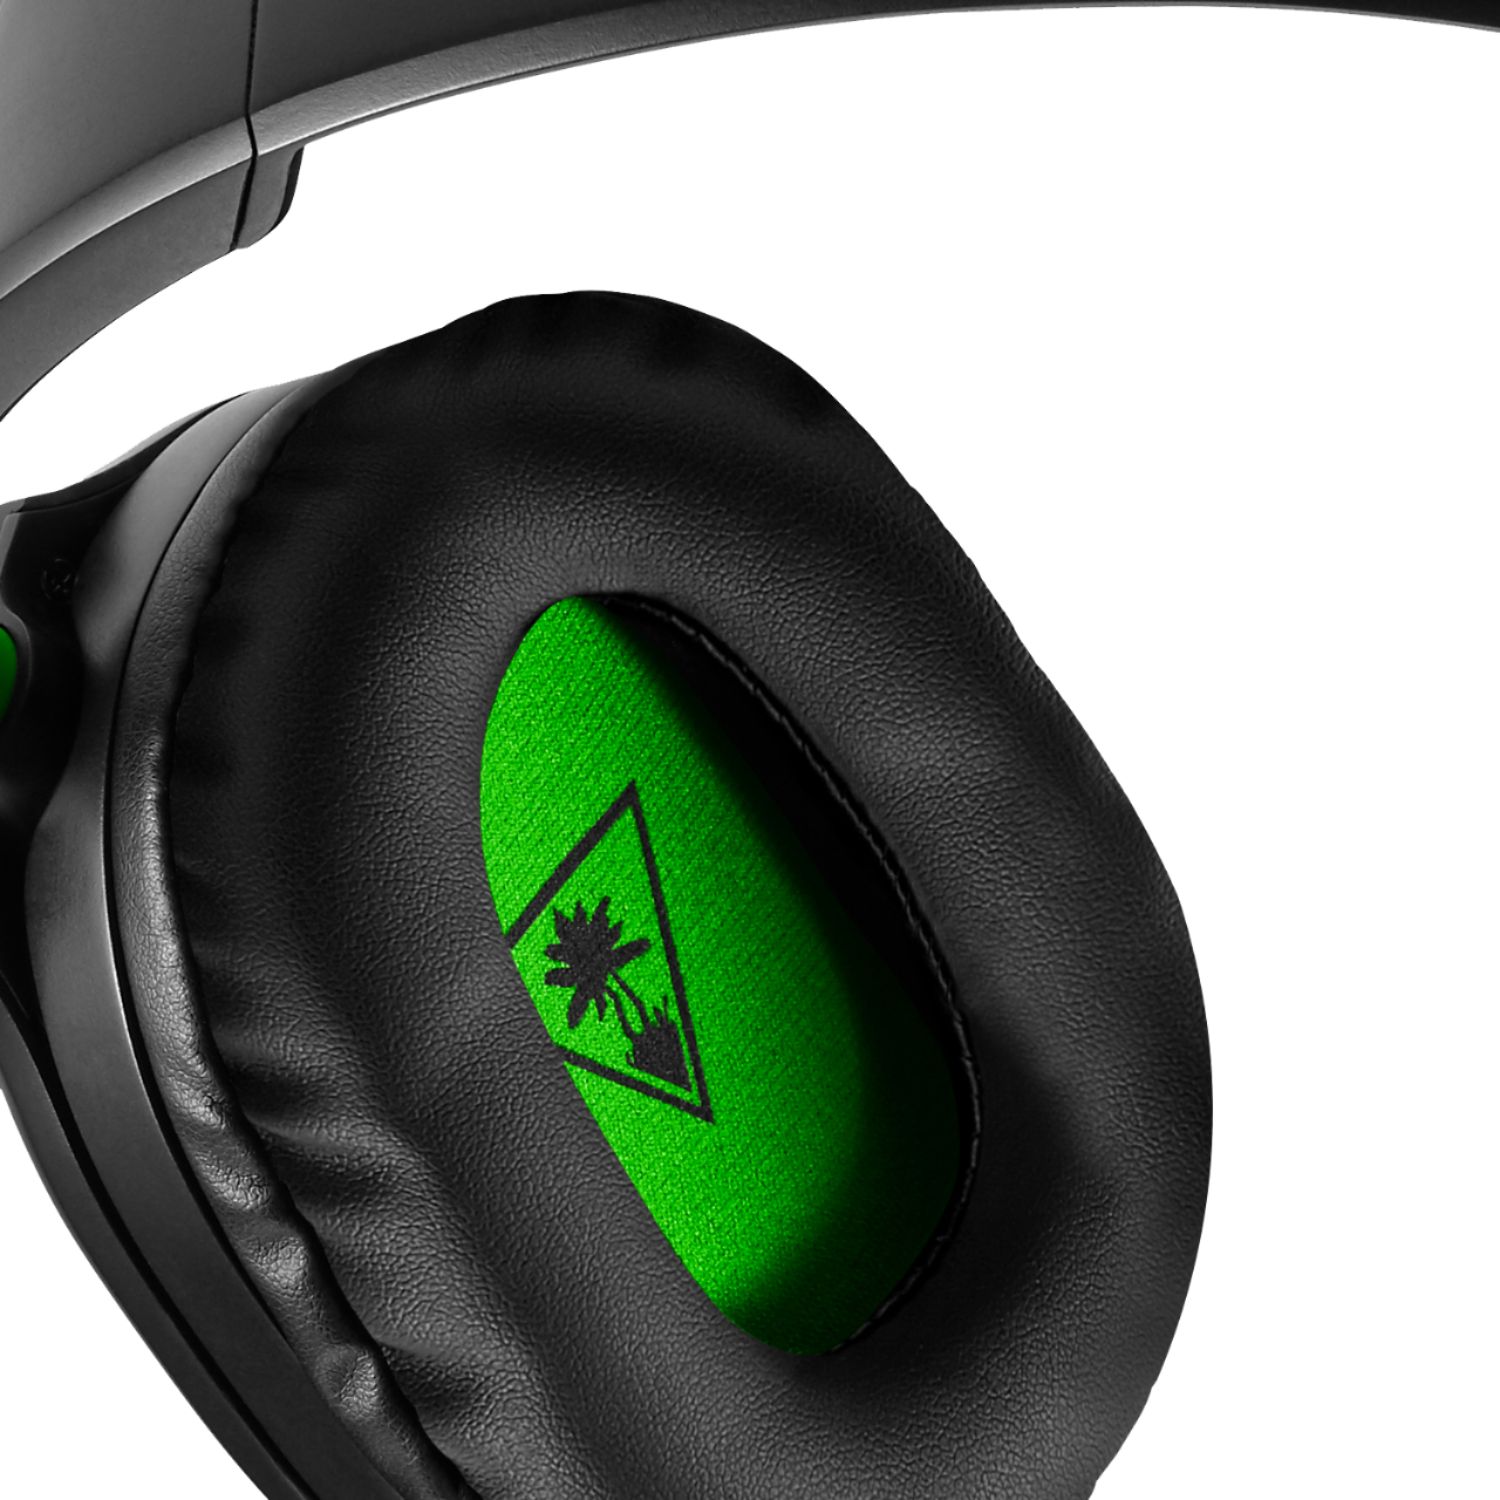 xbox one recon 70 gaming headset